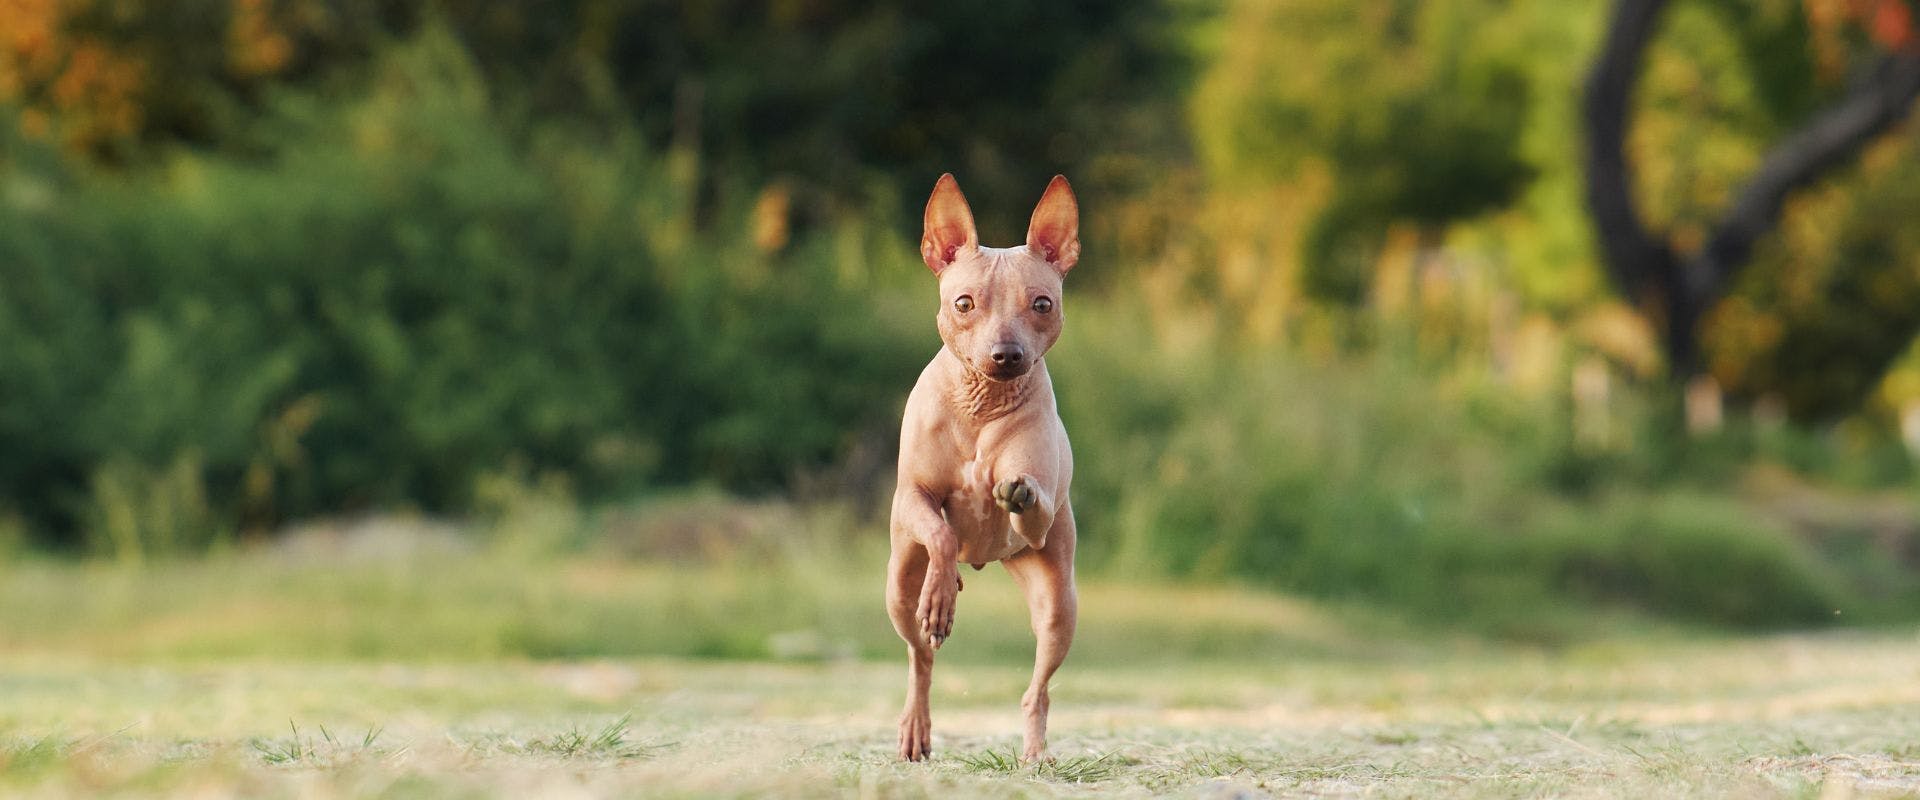 American Hairless Terrier running at a dog park